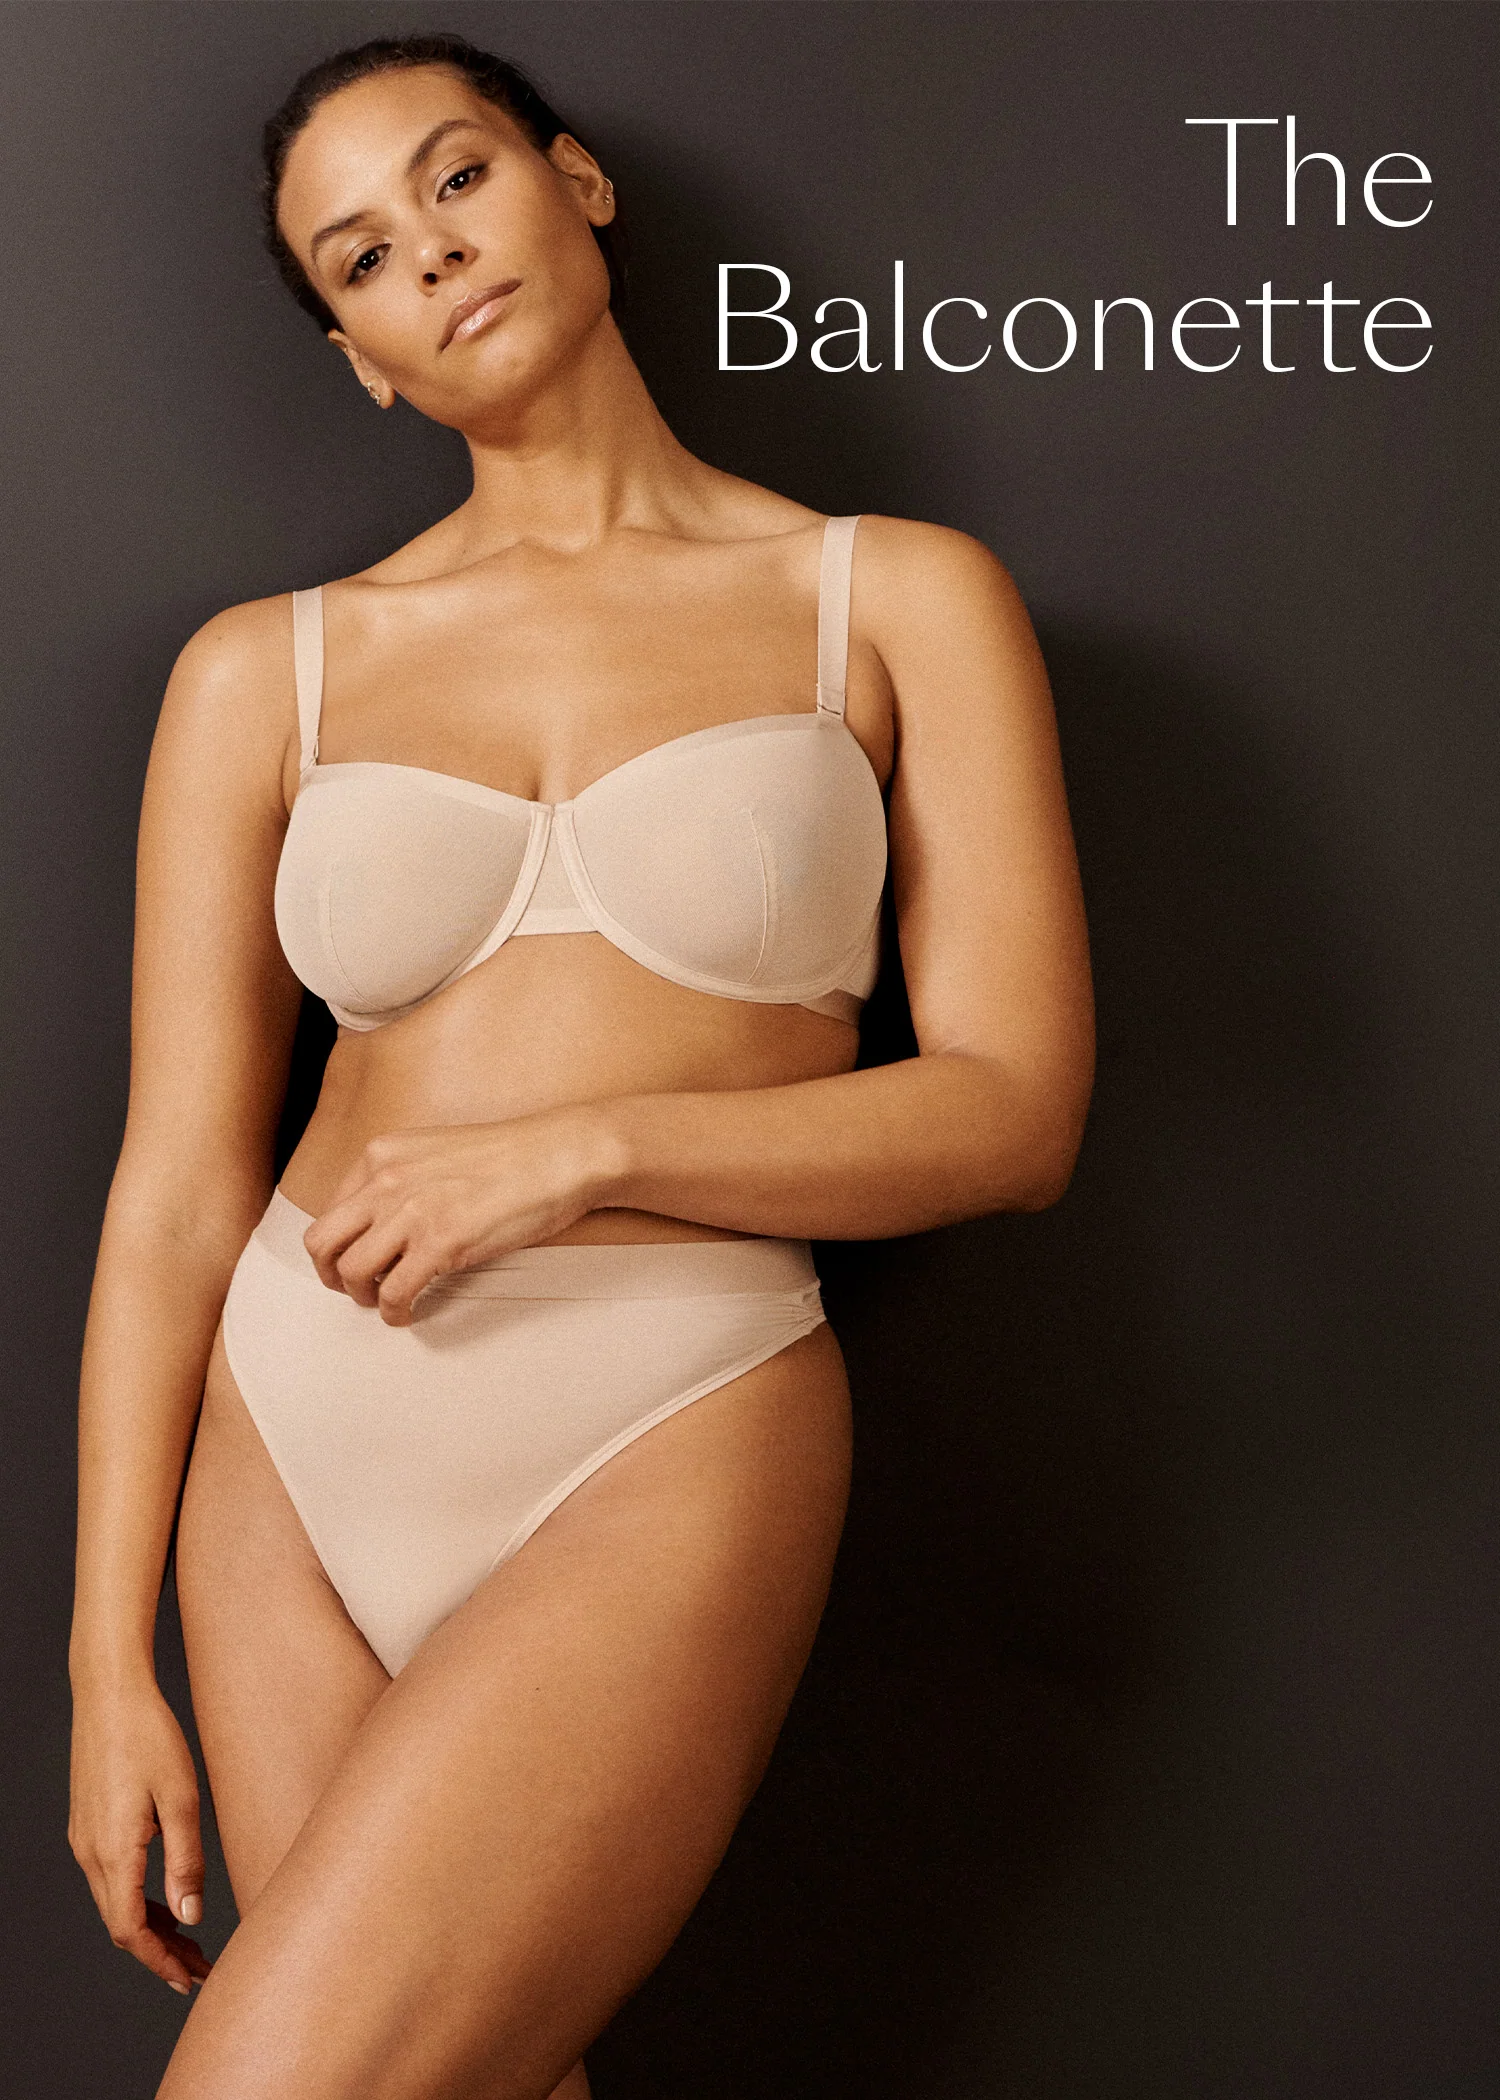 Shop Bras - Find your perfect fit at CUUP